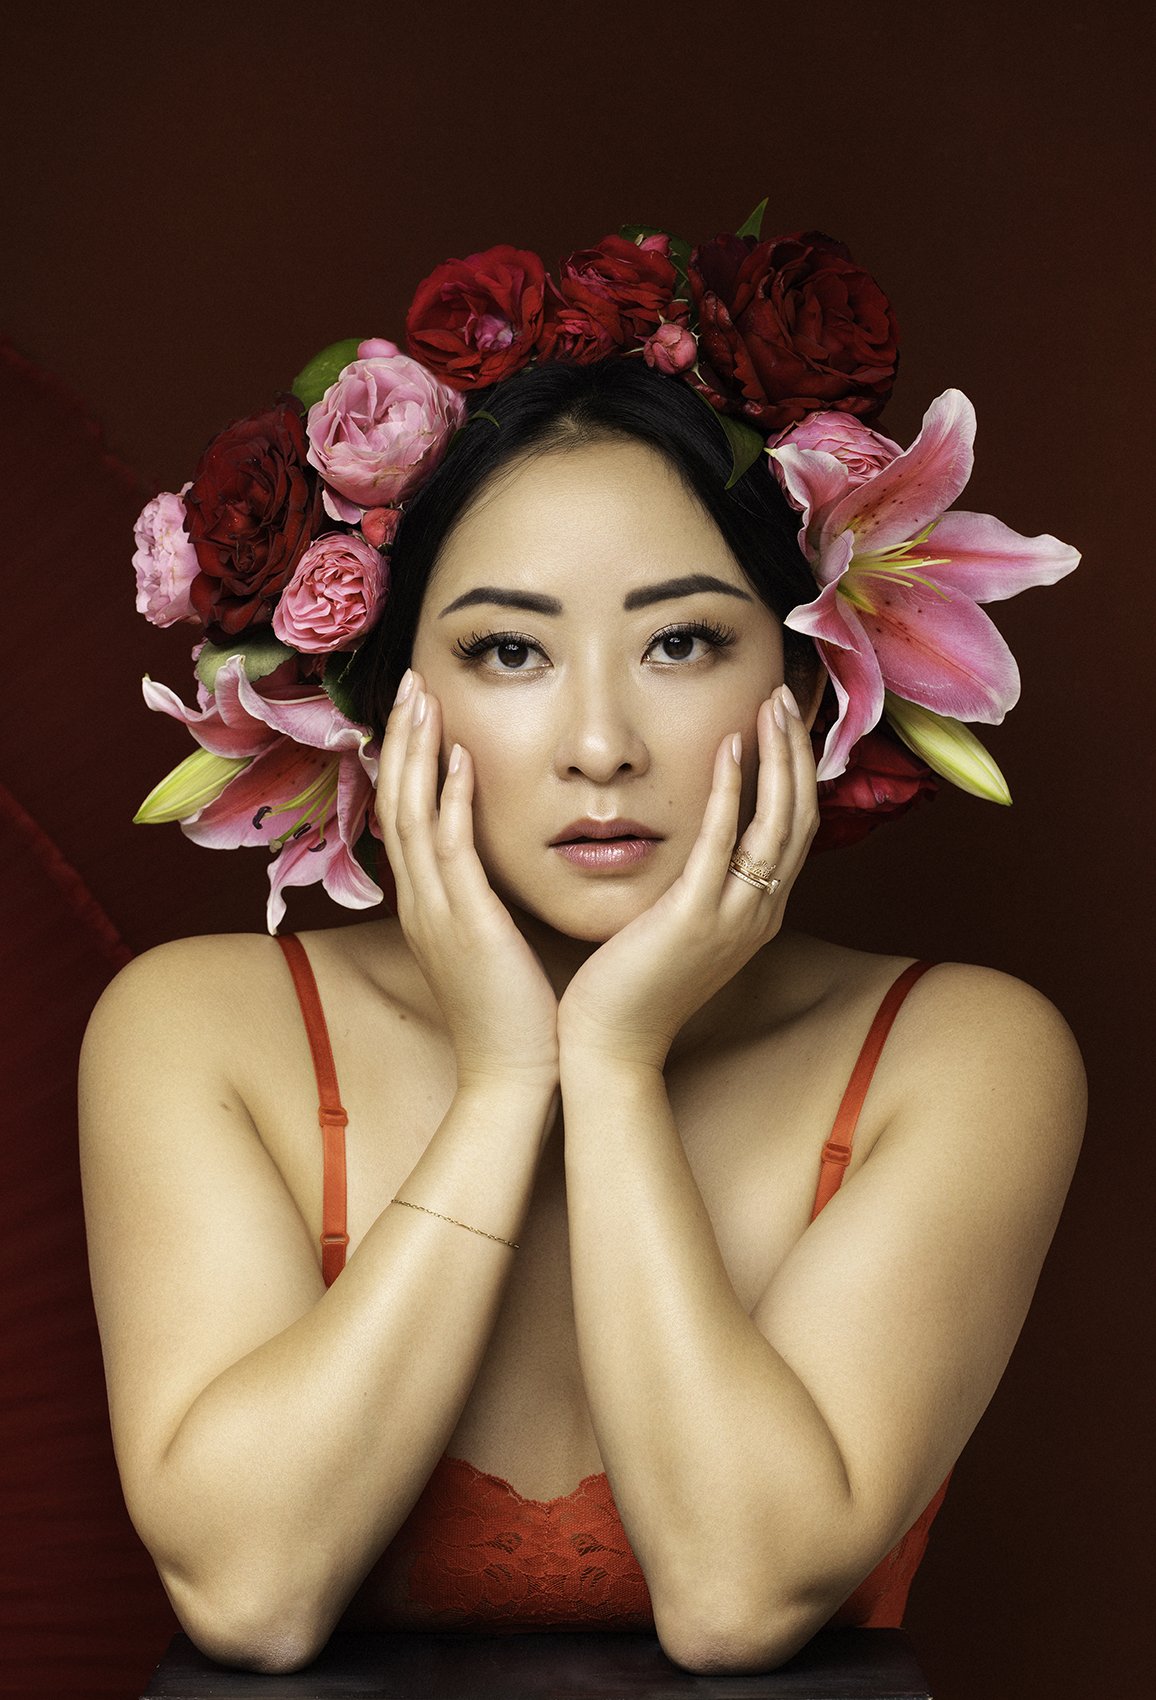  Beauty portrait of asian woman with floral headpiece by Beauclair Photography  